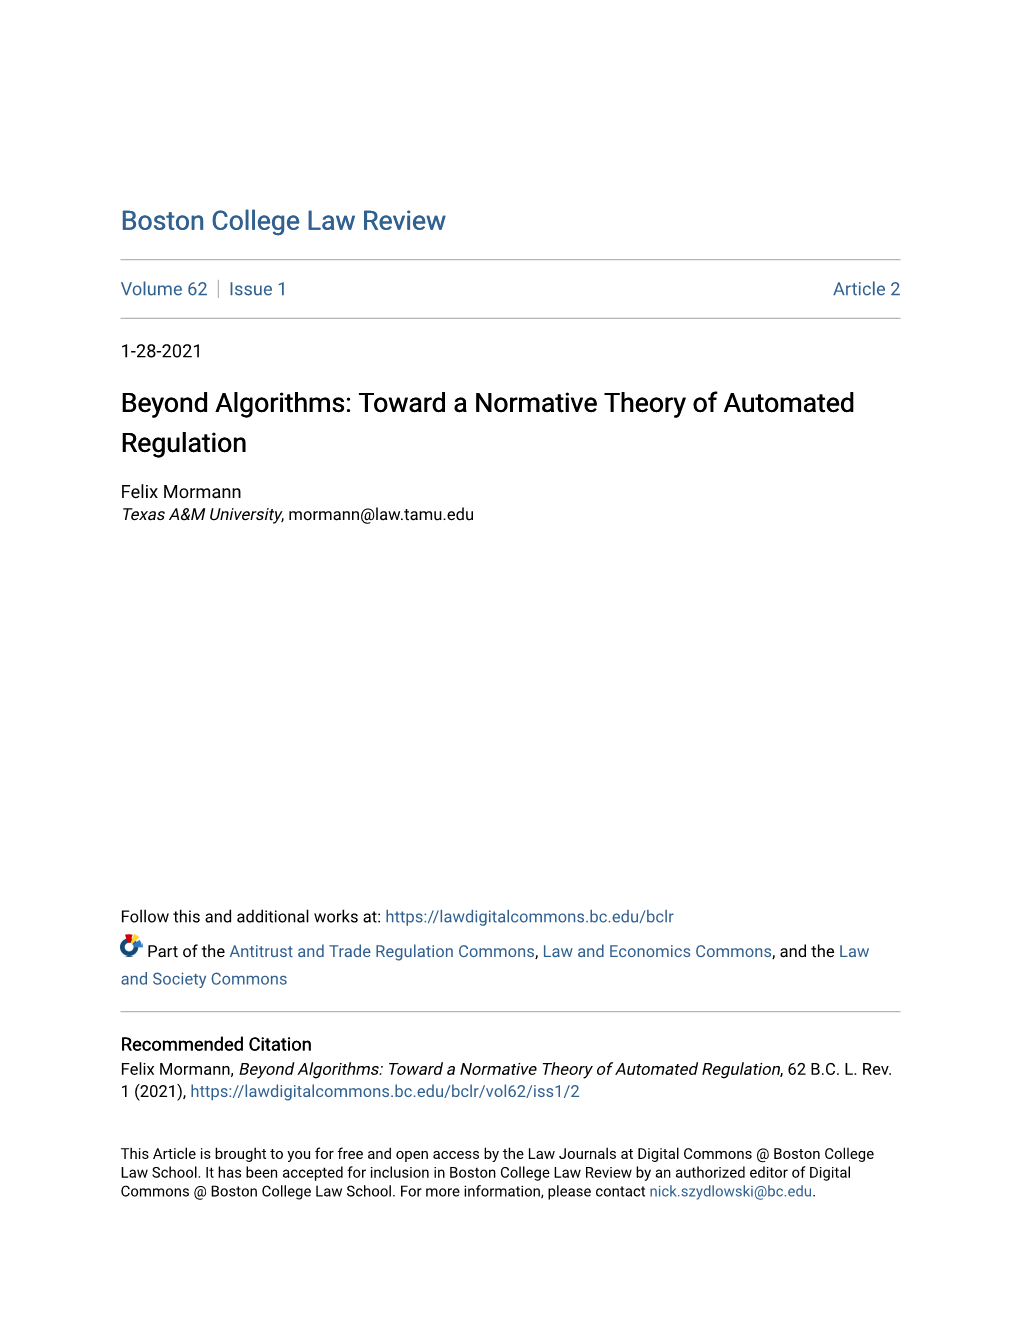 Beyond Algorithms: Toward a Normative Theory of Automated Regulation